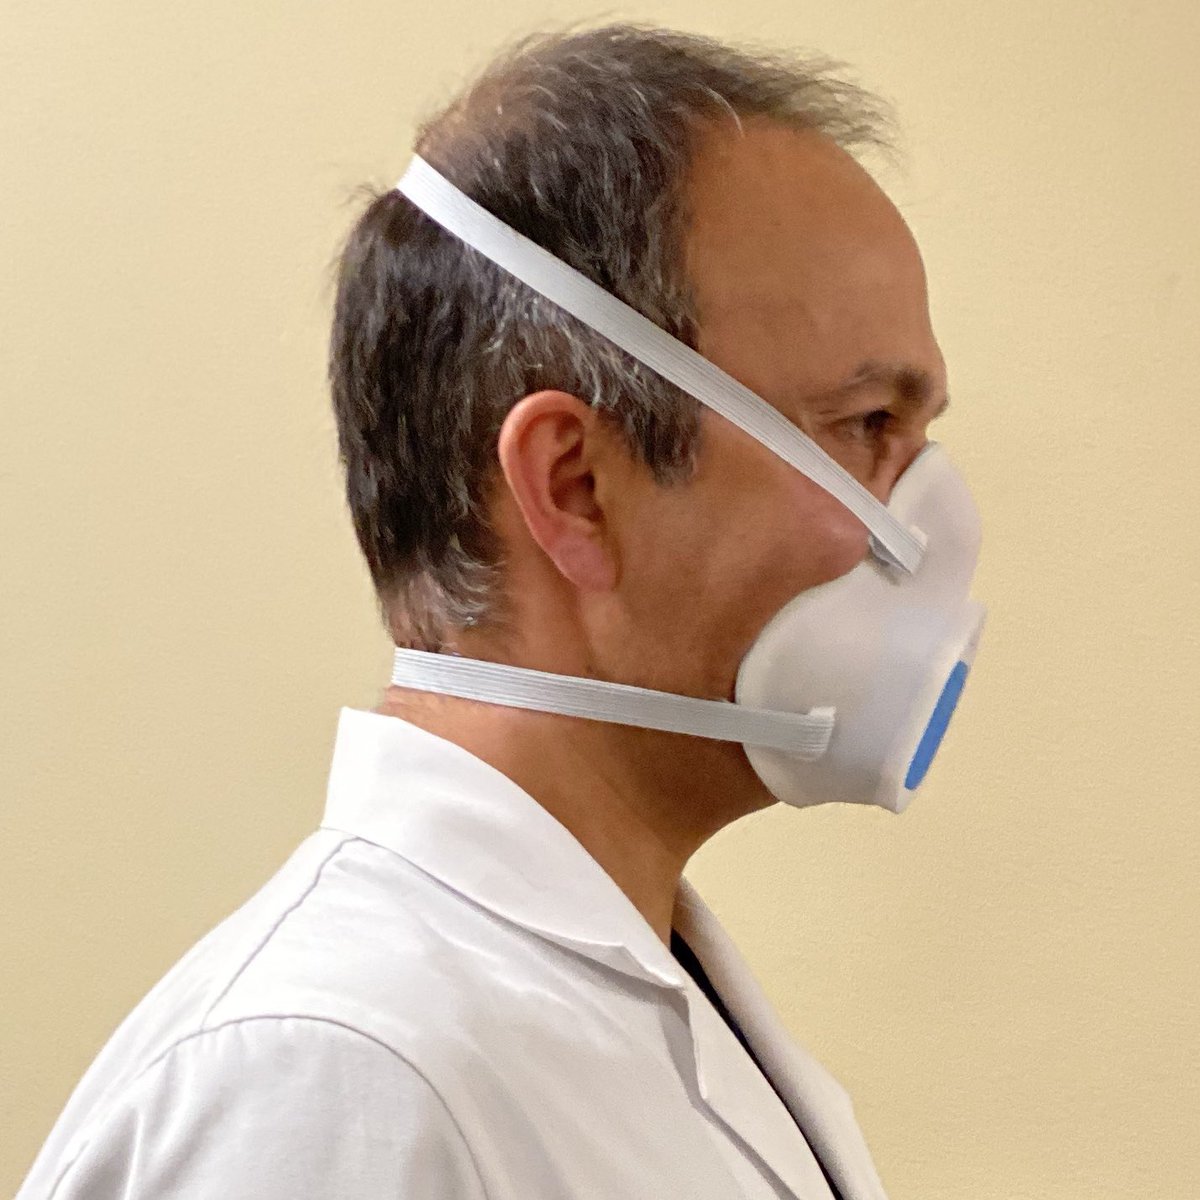 Happy to report that we’ve developed a 3-D printed mask. Passed N95 equivalent fit-test with Bitrex (surgical wrap as filter, readily available). Wearable all day. Mask can be resterilized/reused. Nylon-12. Thanks to  @Intermountain3D for co-development.  #COVID19  #PPE